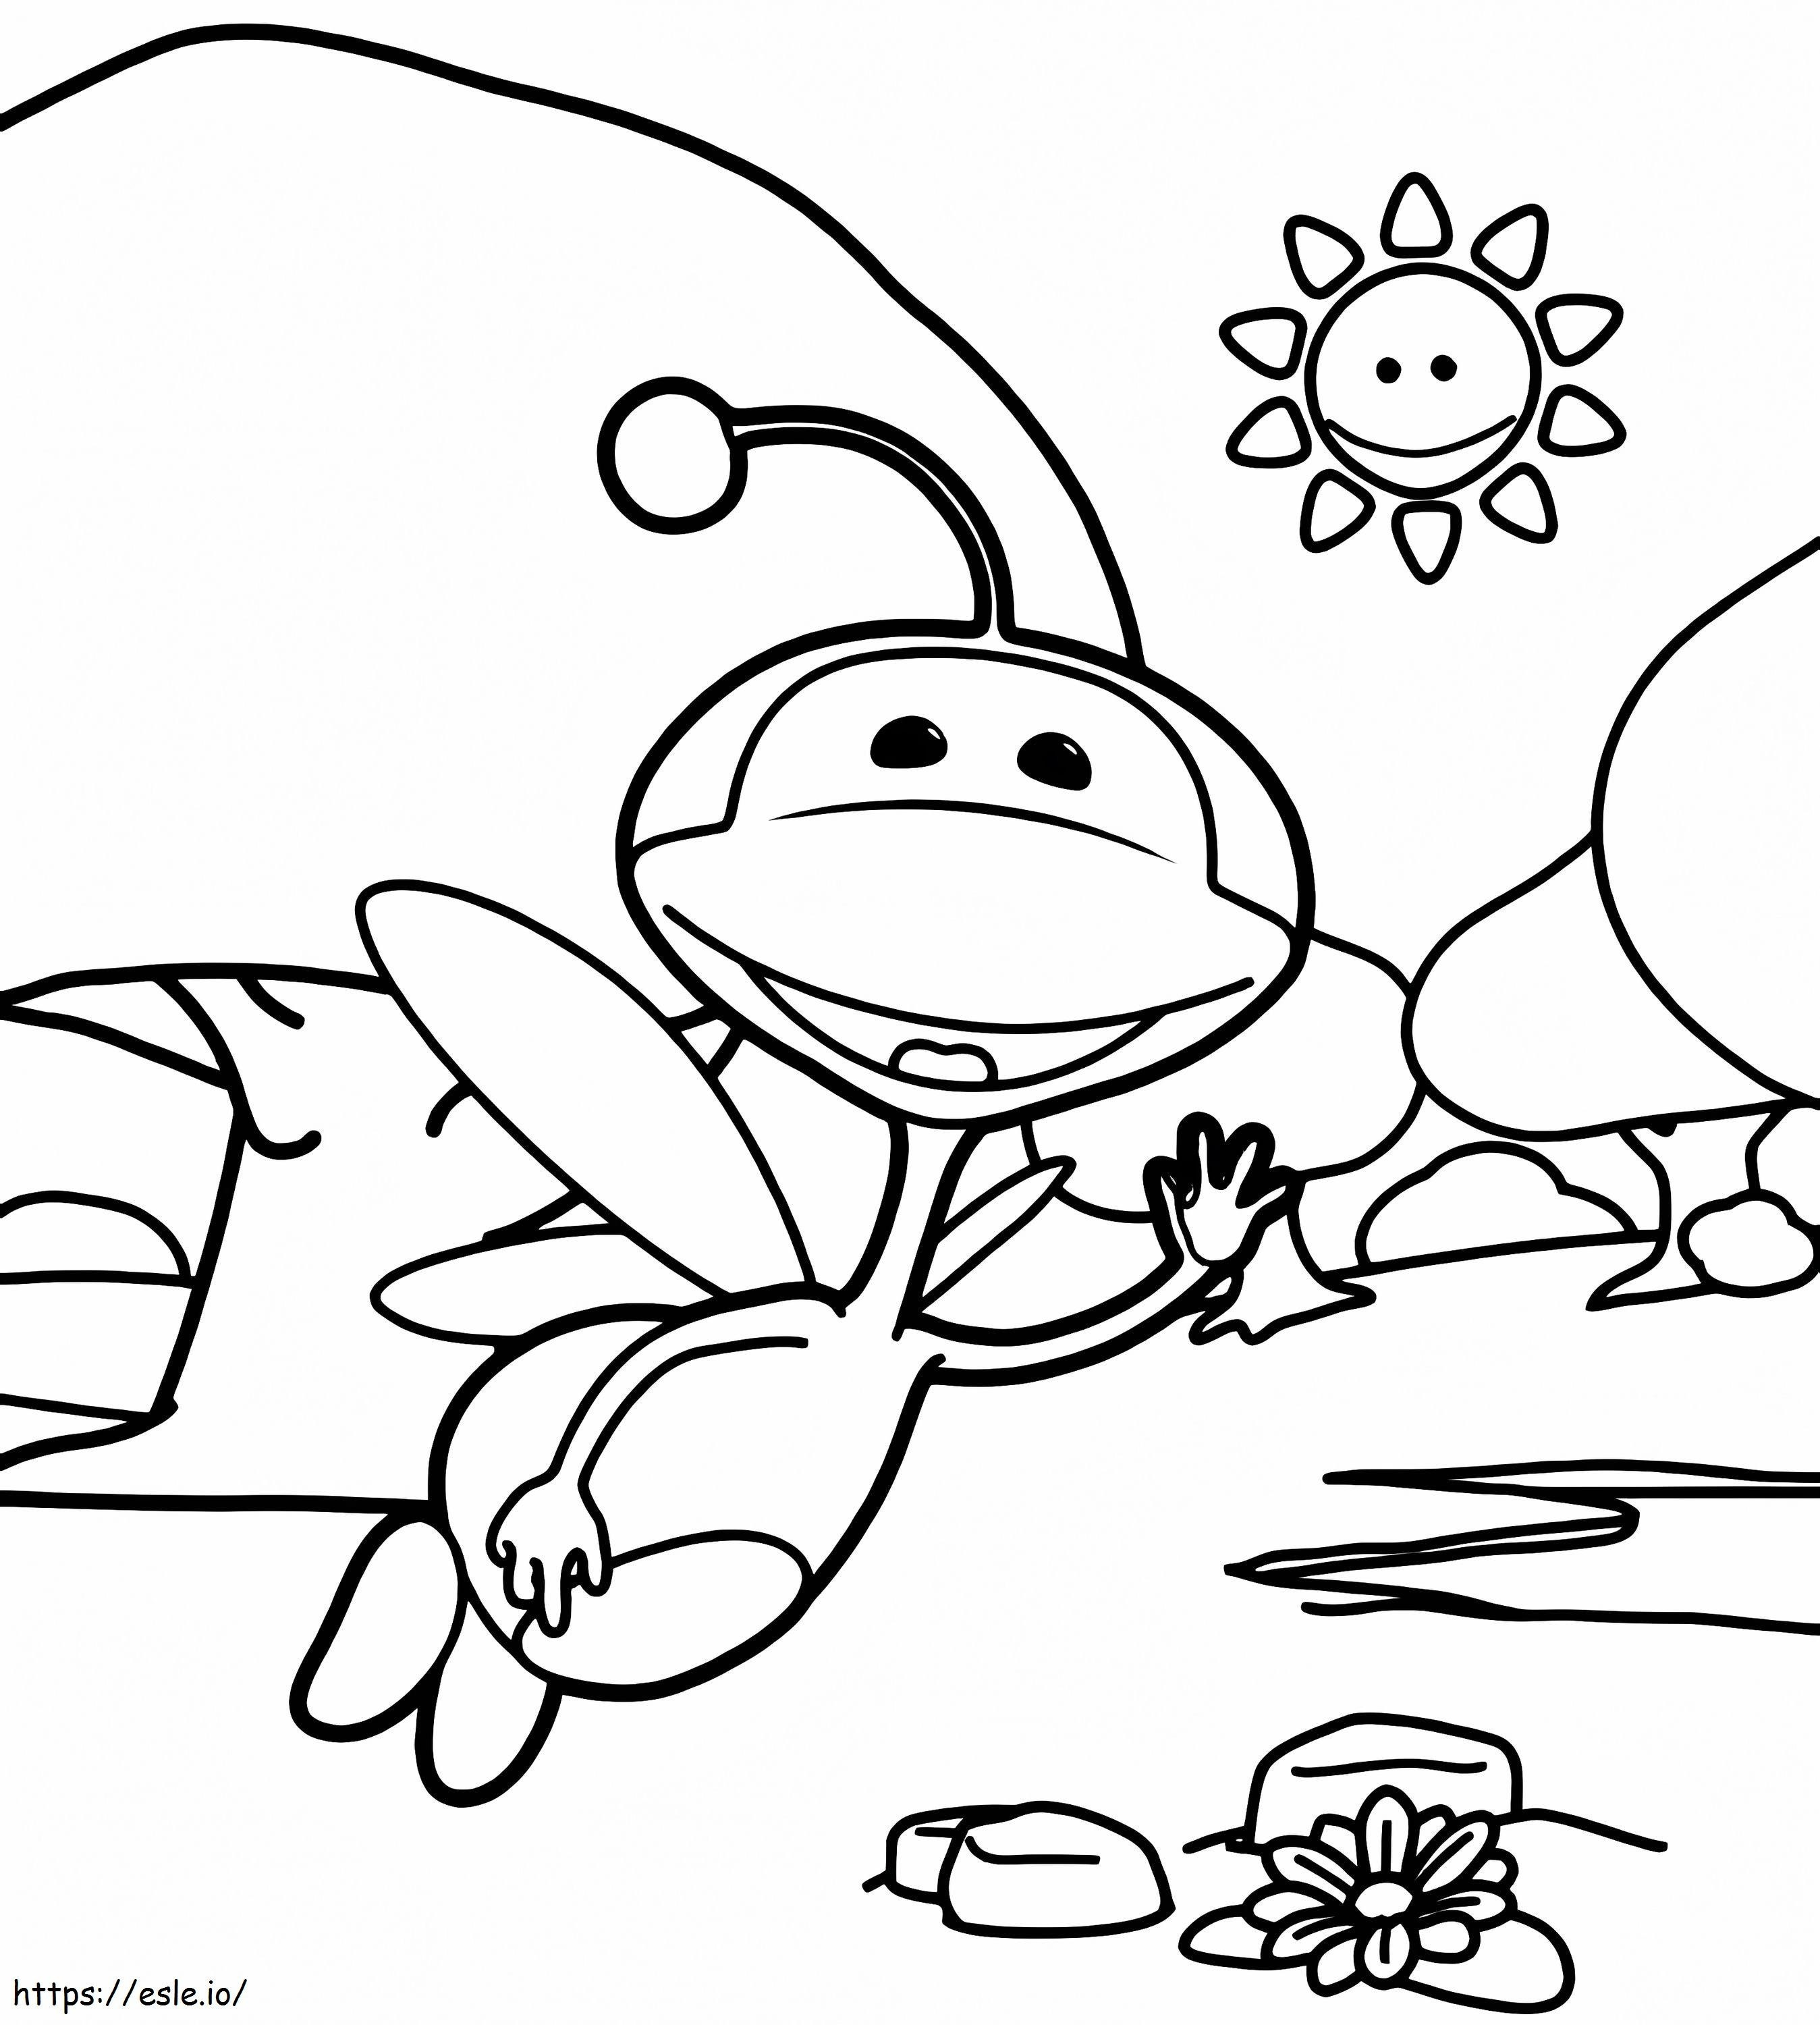 Uki And Sun coloring page